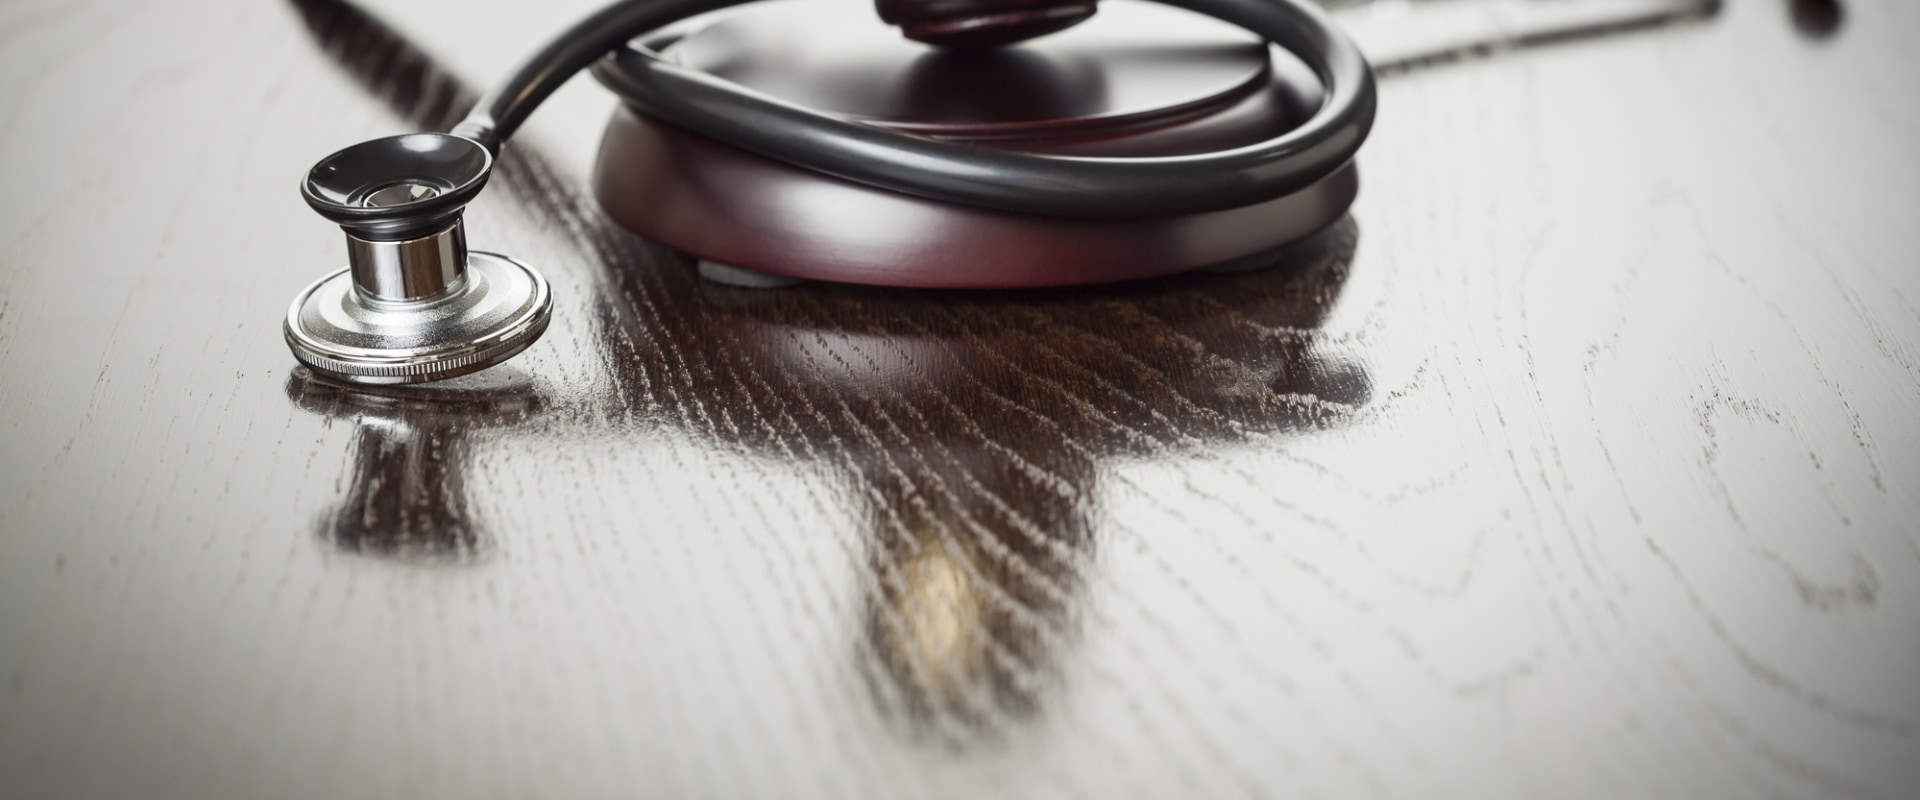 Understanding Types of Medical Malpractice Cases and Legal Options